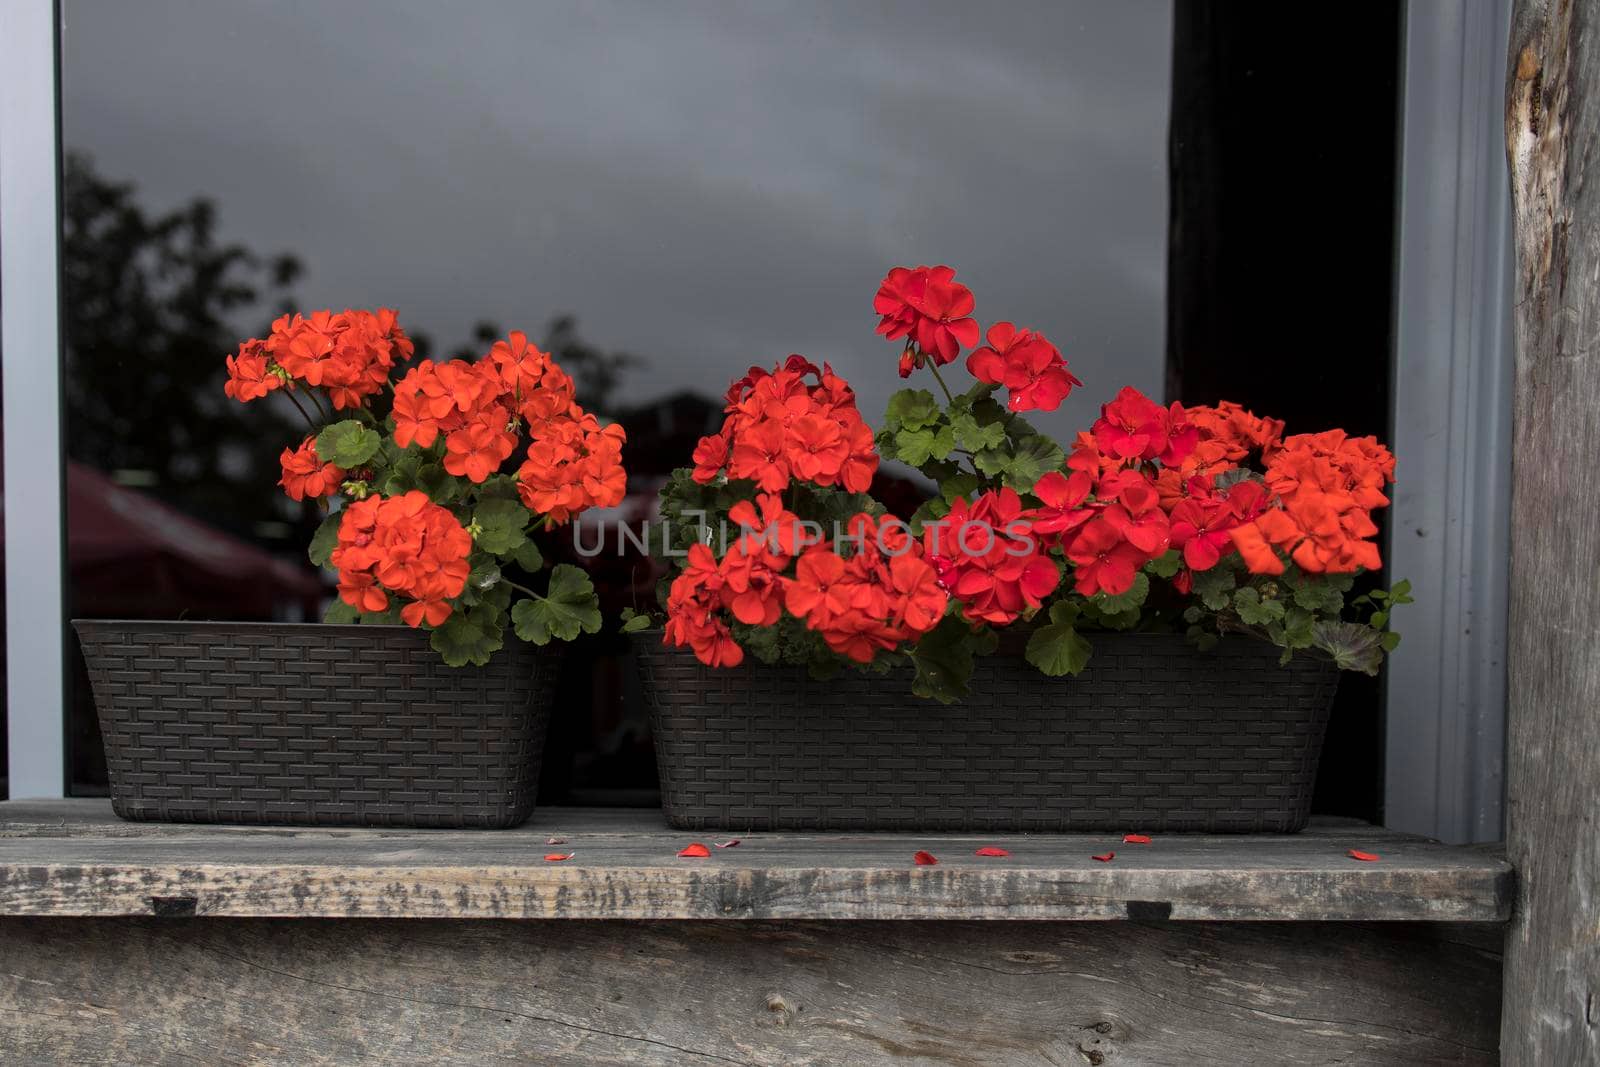 Crates of red blooming geraniums adorn the windowsill of outdoor cafe. by elenarostunova